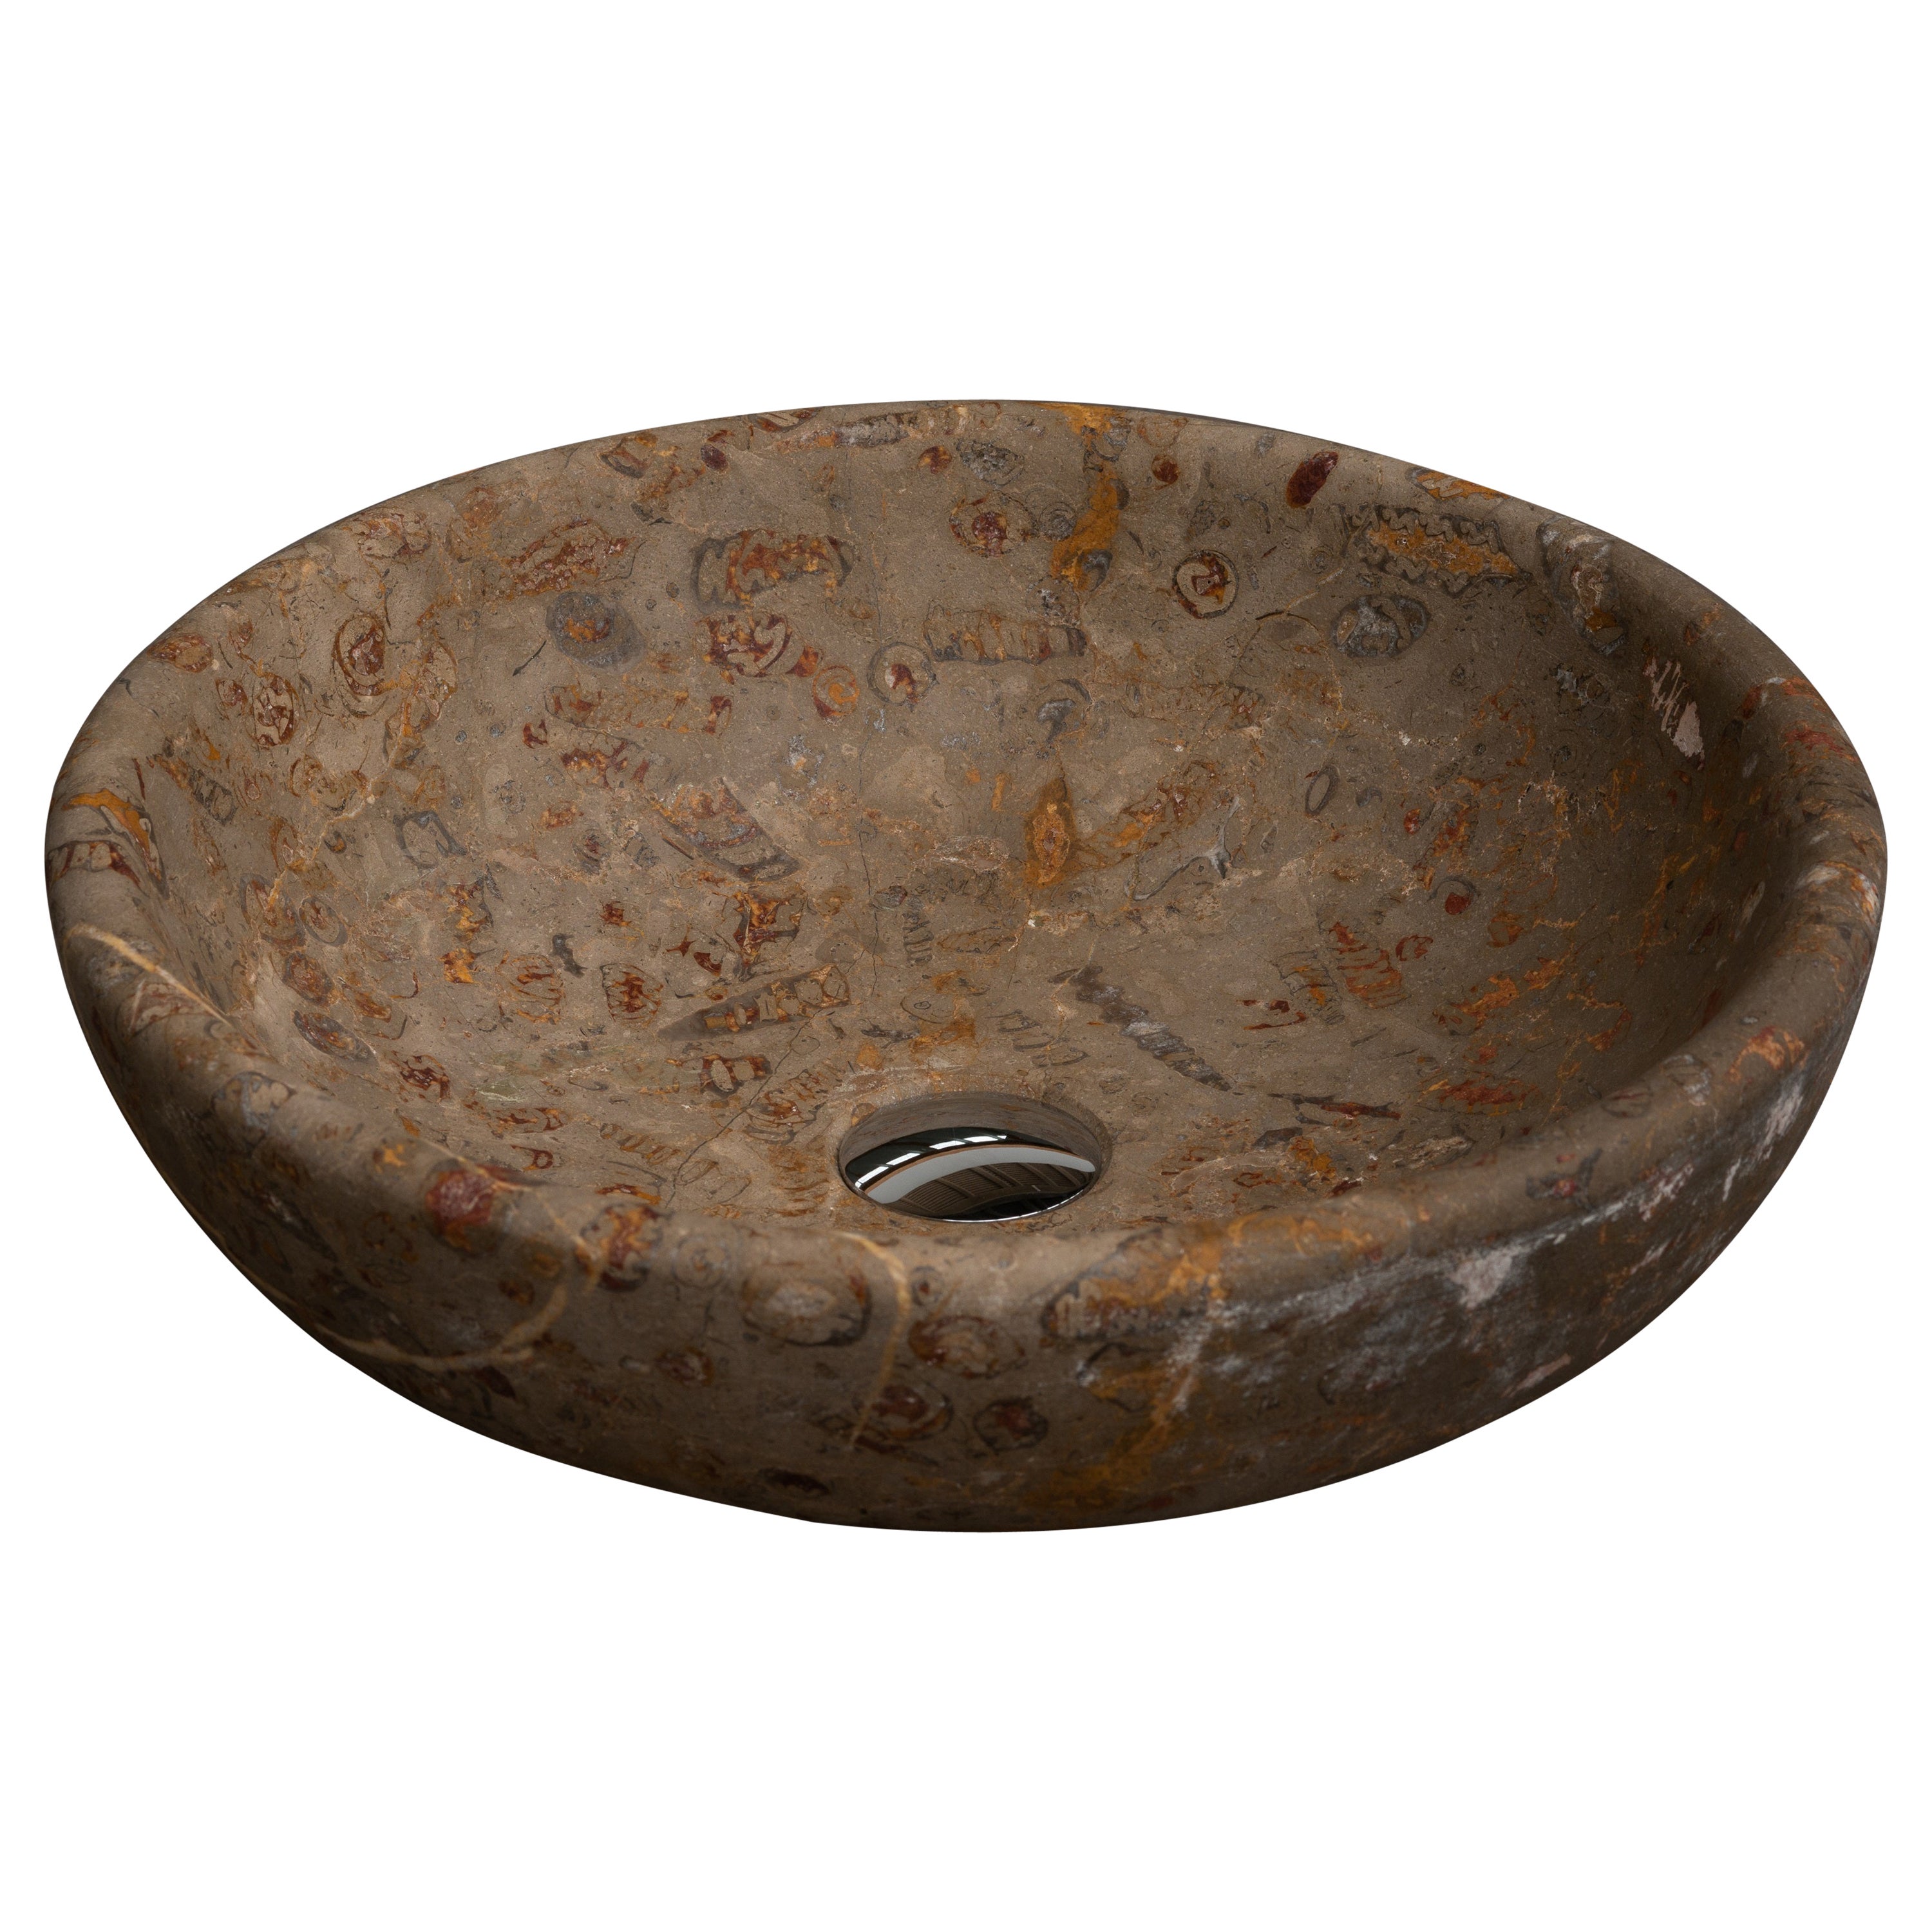 AINA Contemporary Jurassic Fossil Marble Leda Waschbecken, Living Collection im Angebot